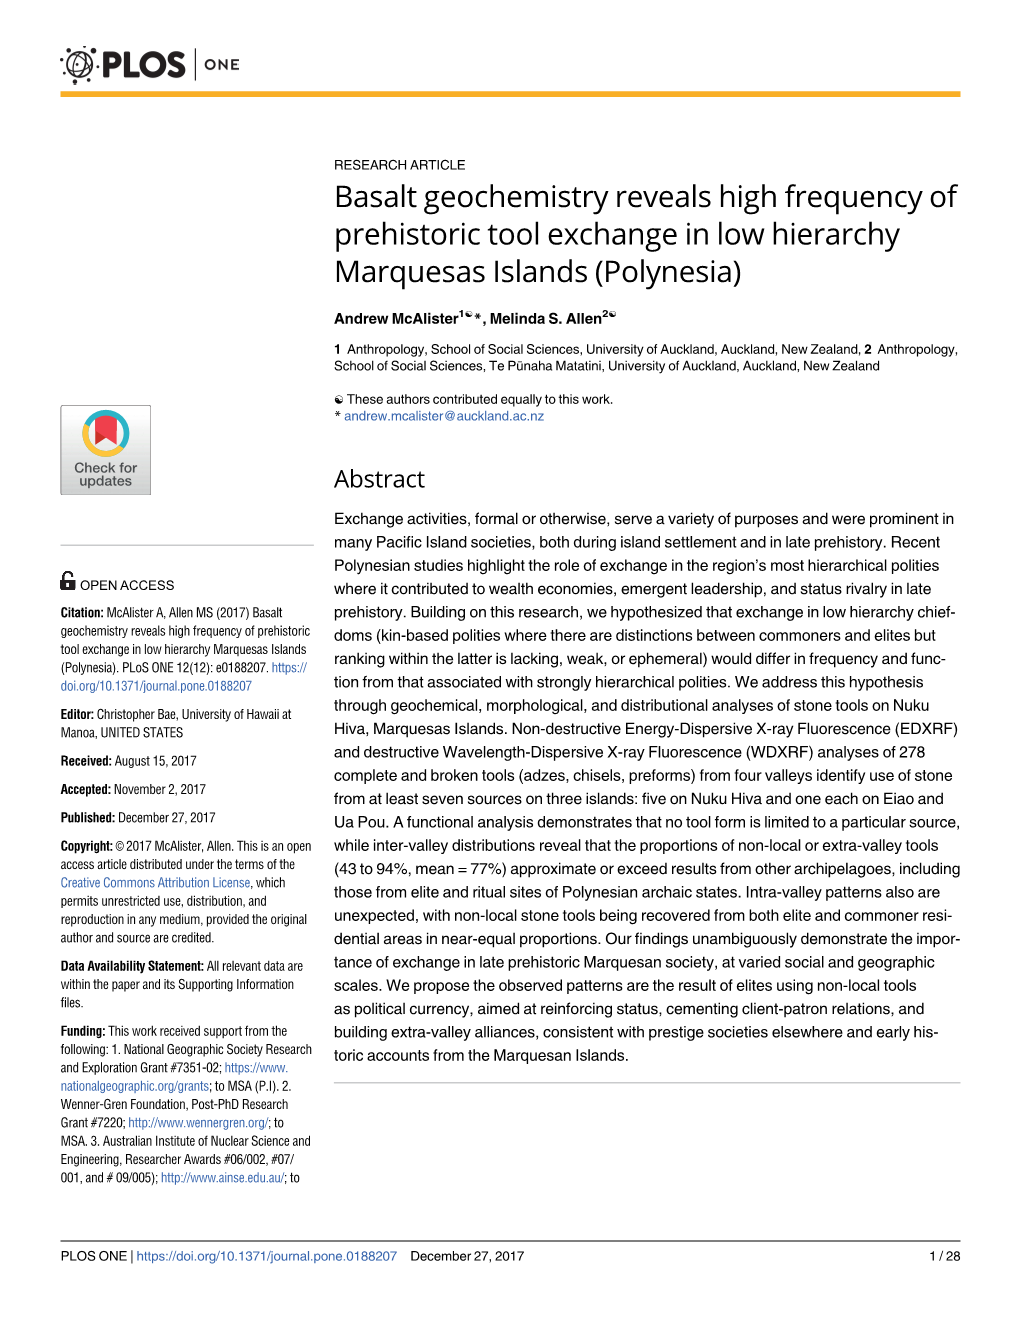 Basalt Geochemistry Reveals High Frequency of Prehistoric Tool Exchange in Low Hierarchy Marquesas Islands (Polynesia)